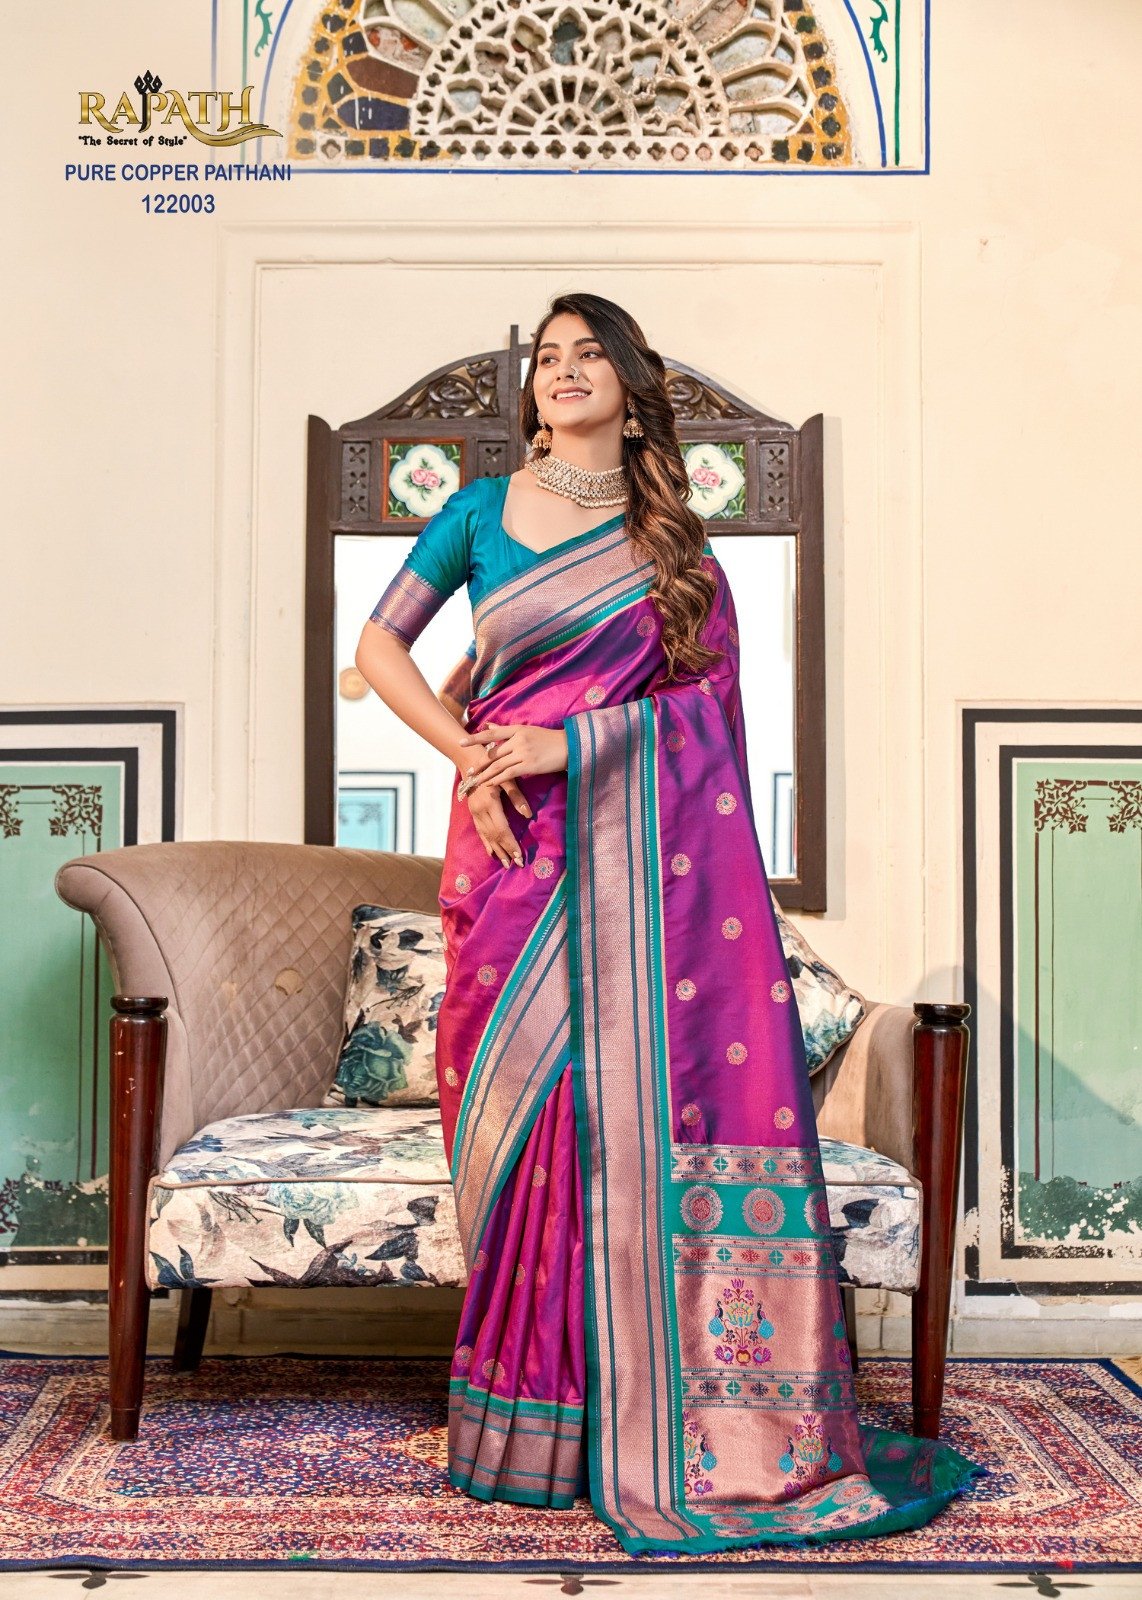 Top Quality Wedding Saree Wholesale Supplier & Manufacturer From India